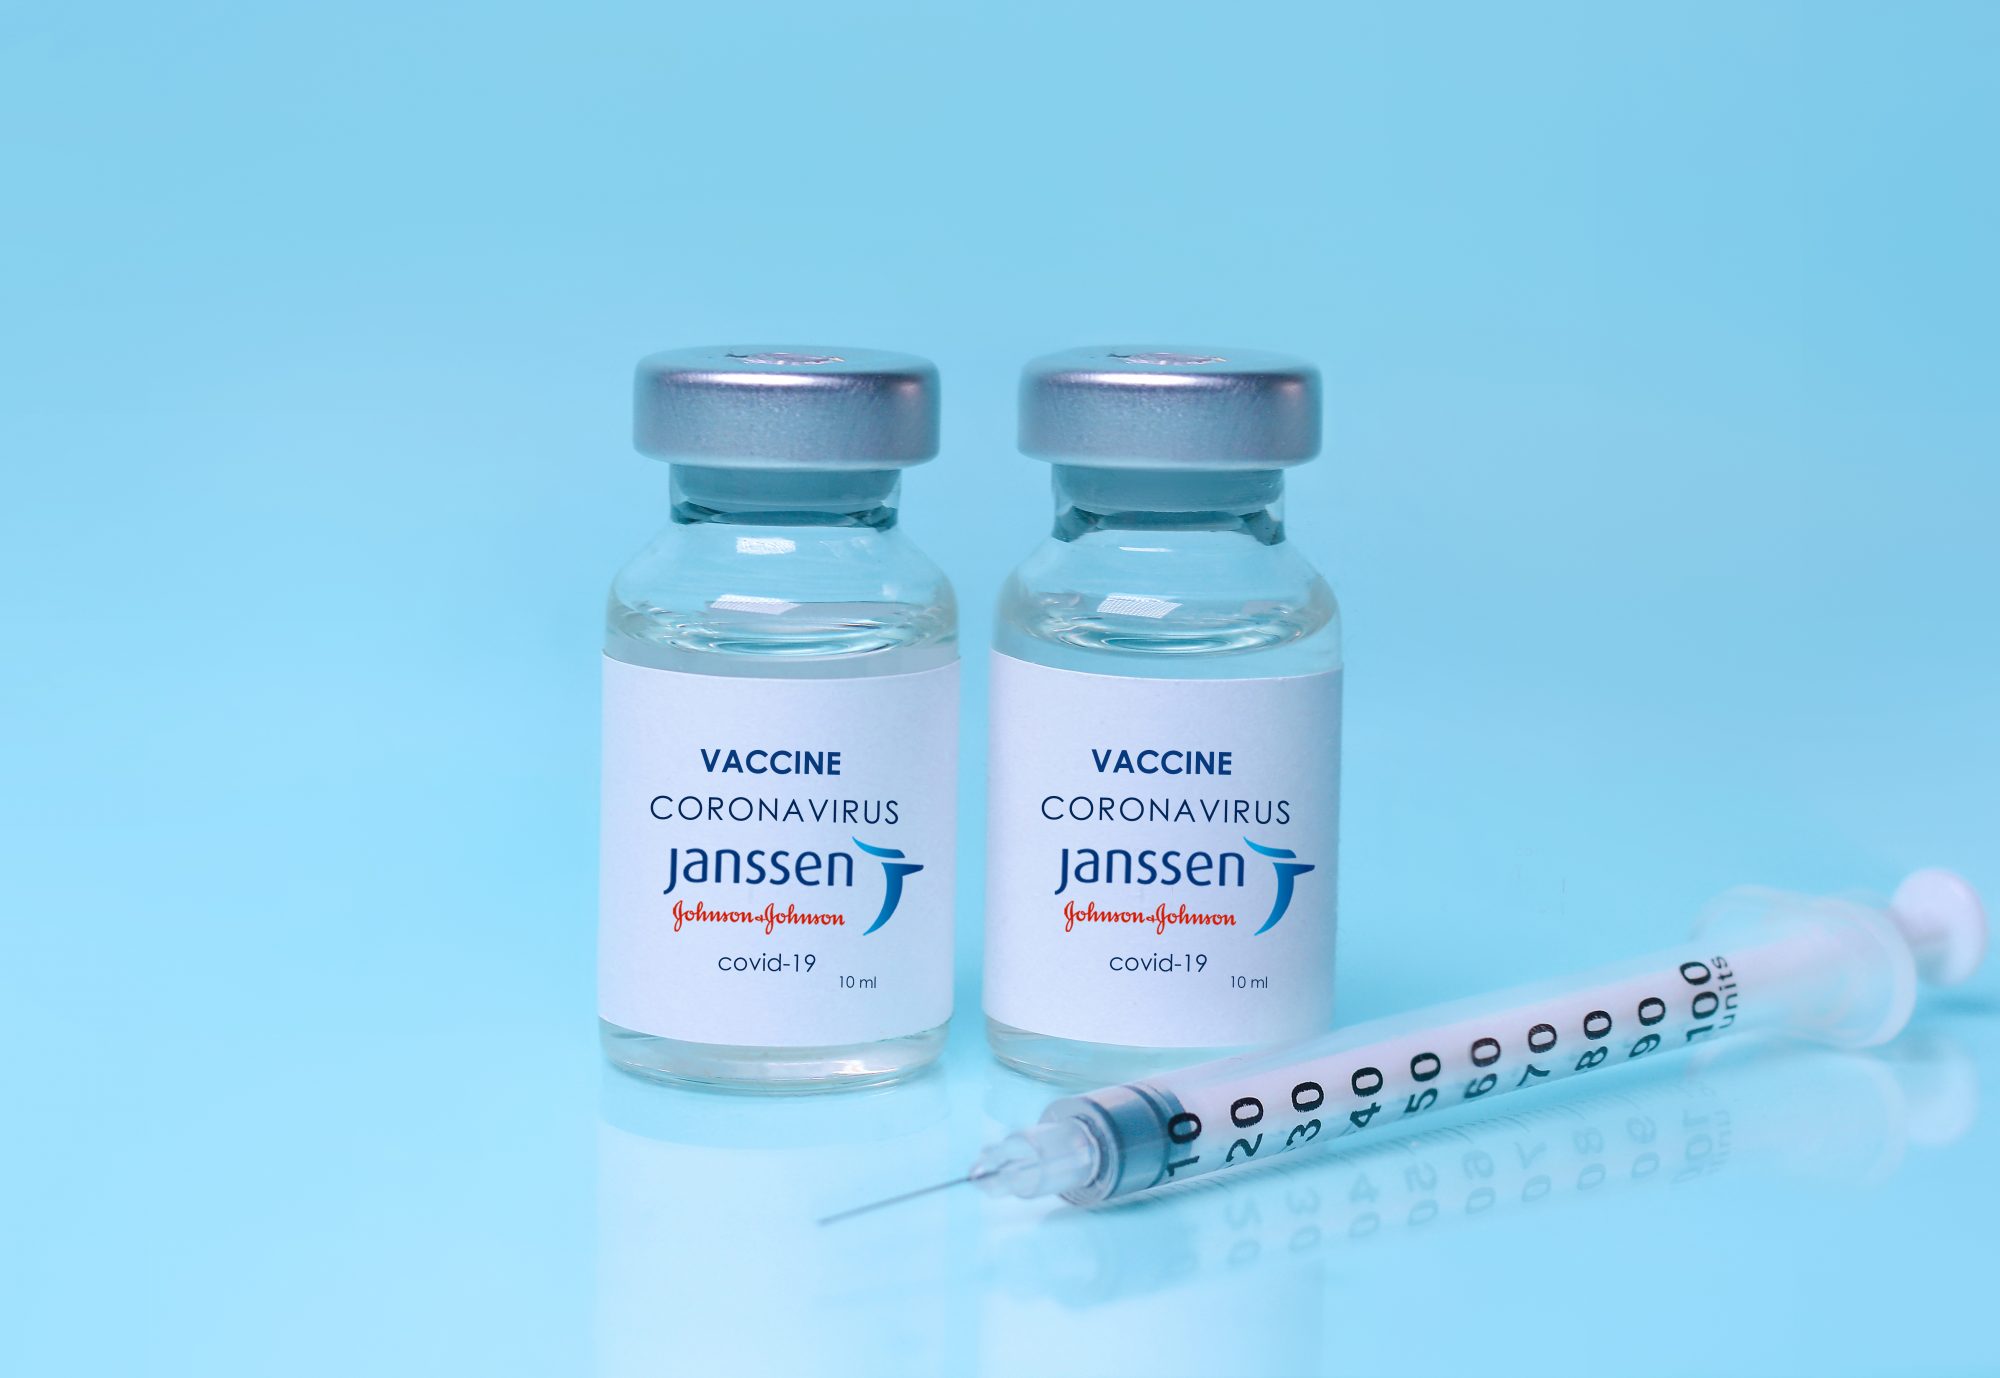 J&J COVID-19 vaccines to be administered at all Health Centres and via ‘pop-up’ venues